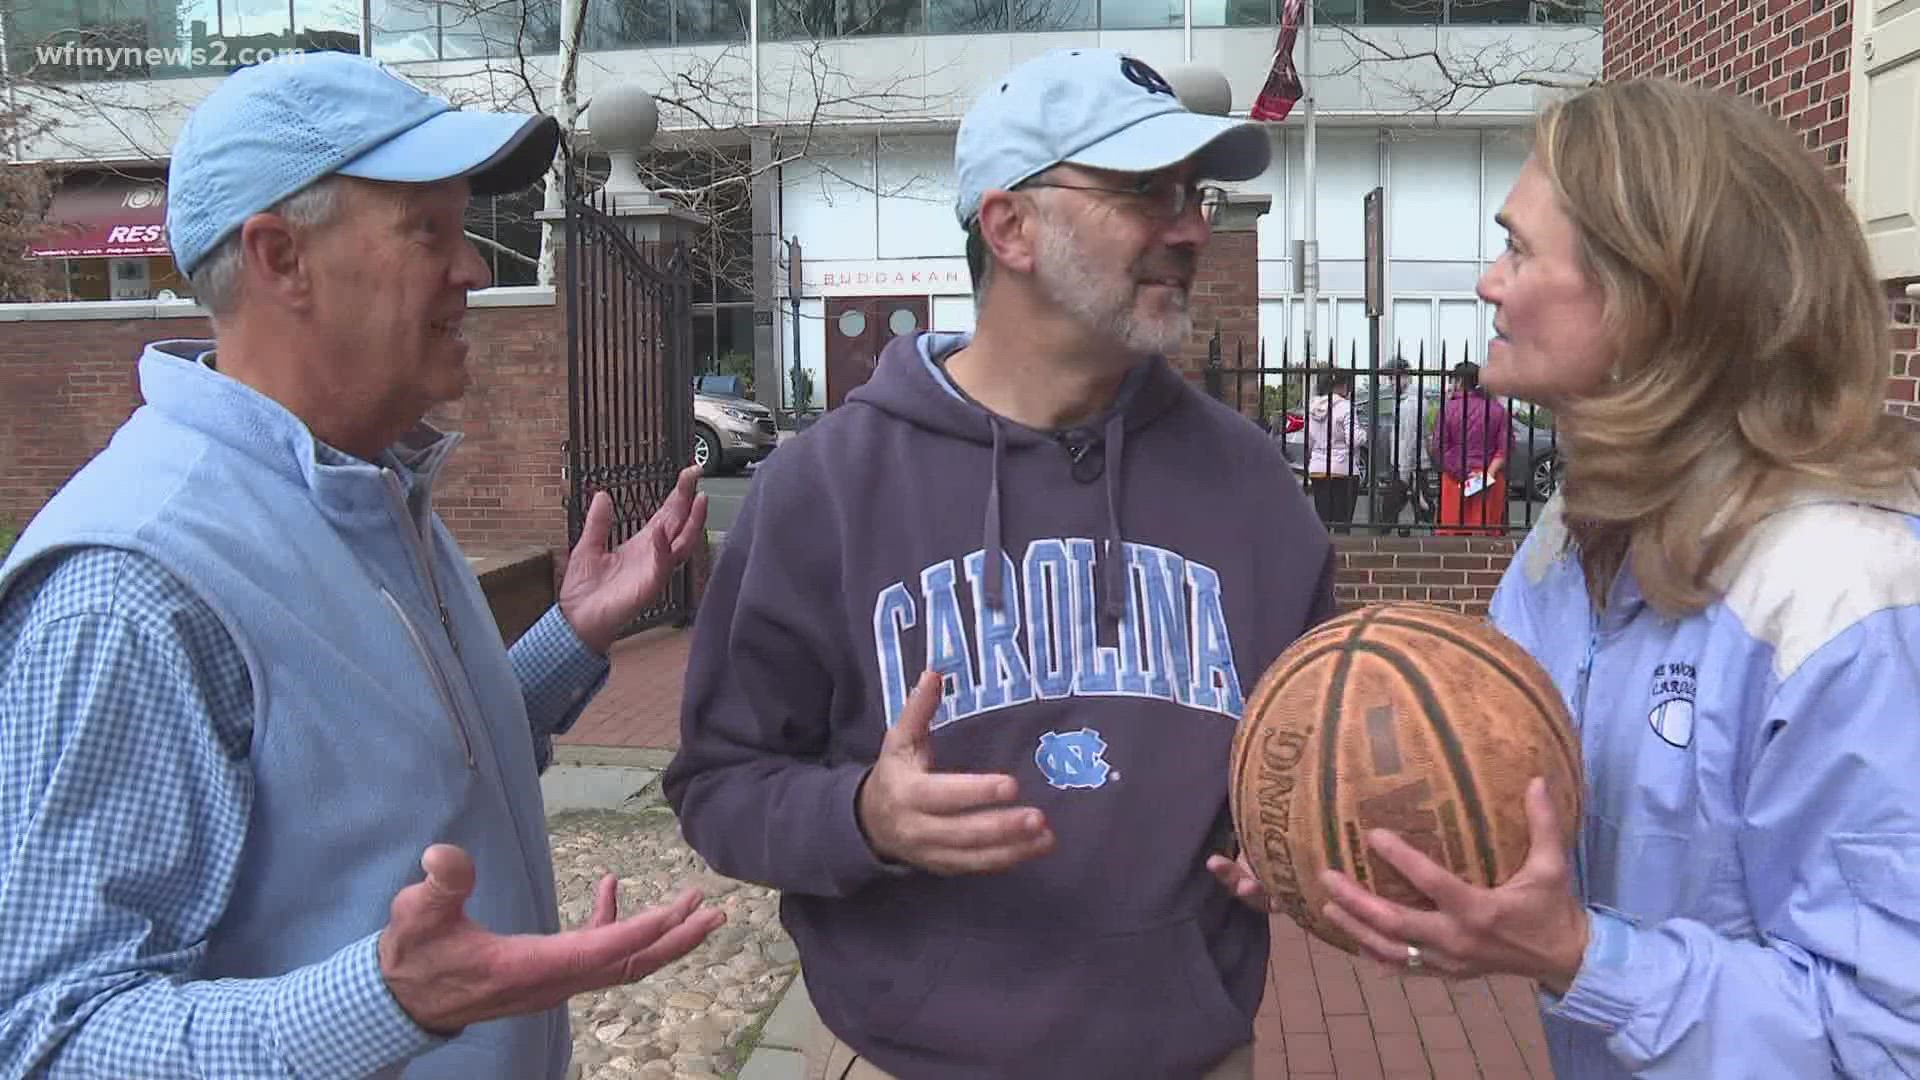 Kevin Kennedy gives us a tour of Philadelphia and runs into some Tar Heel fans.